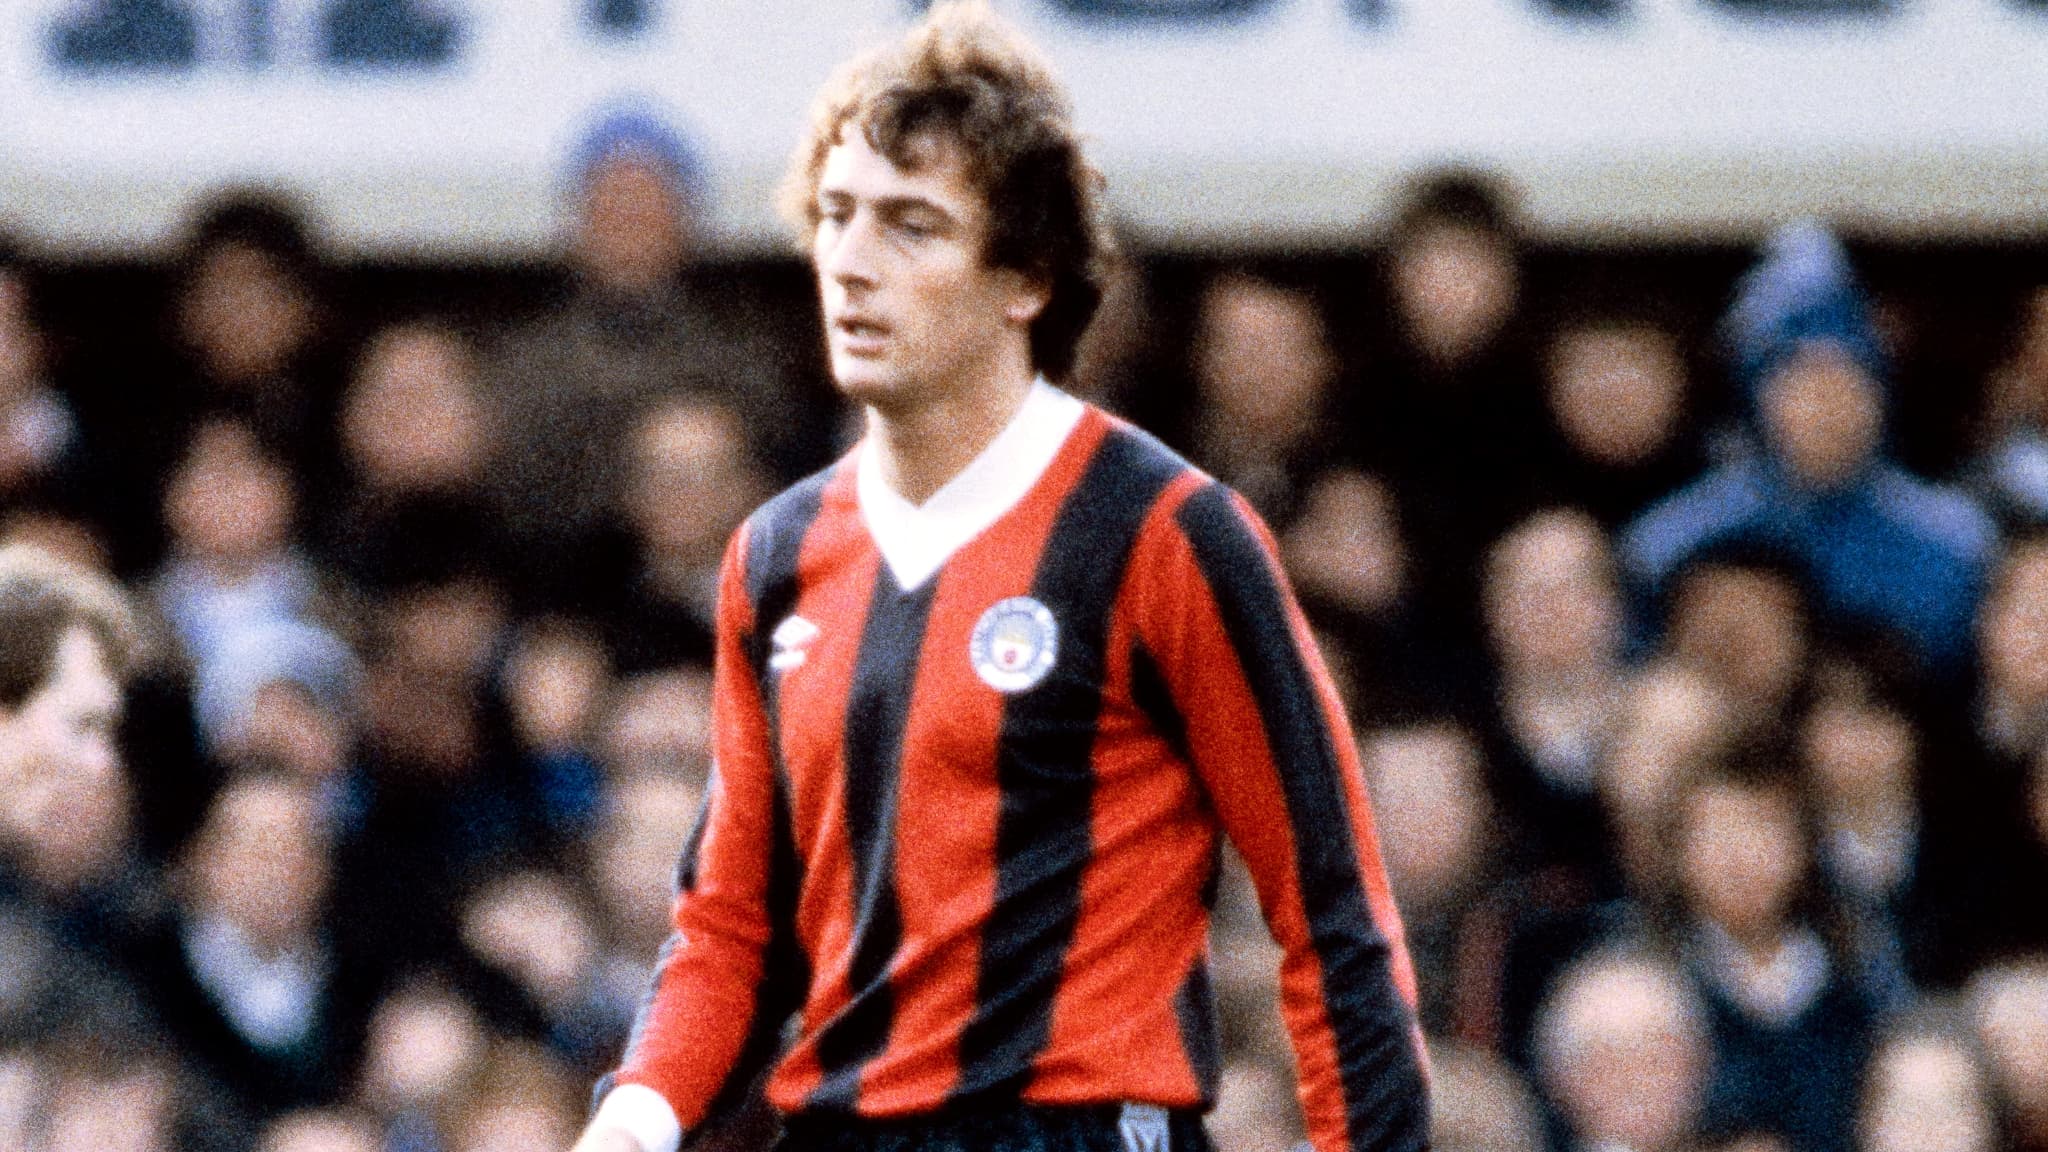 Trevor Francis, the first England player to cross the 1 million mark, has passed away